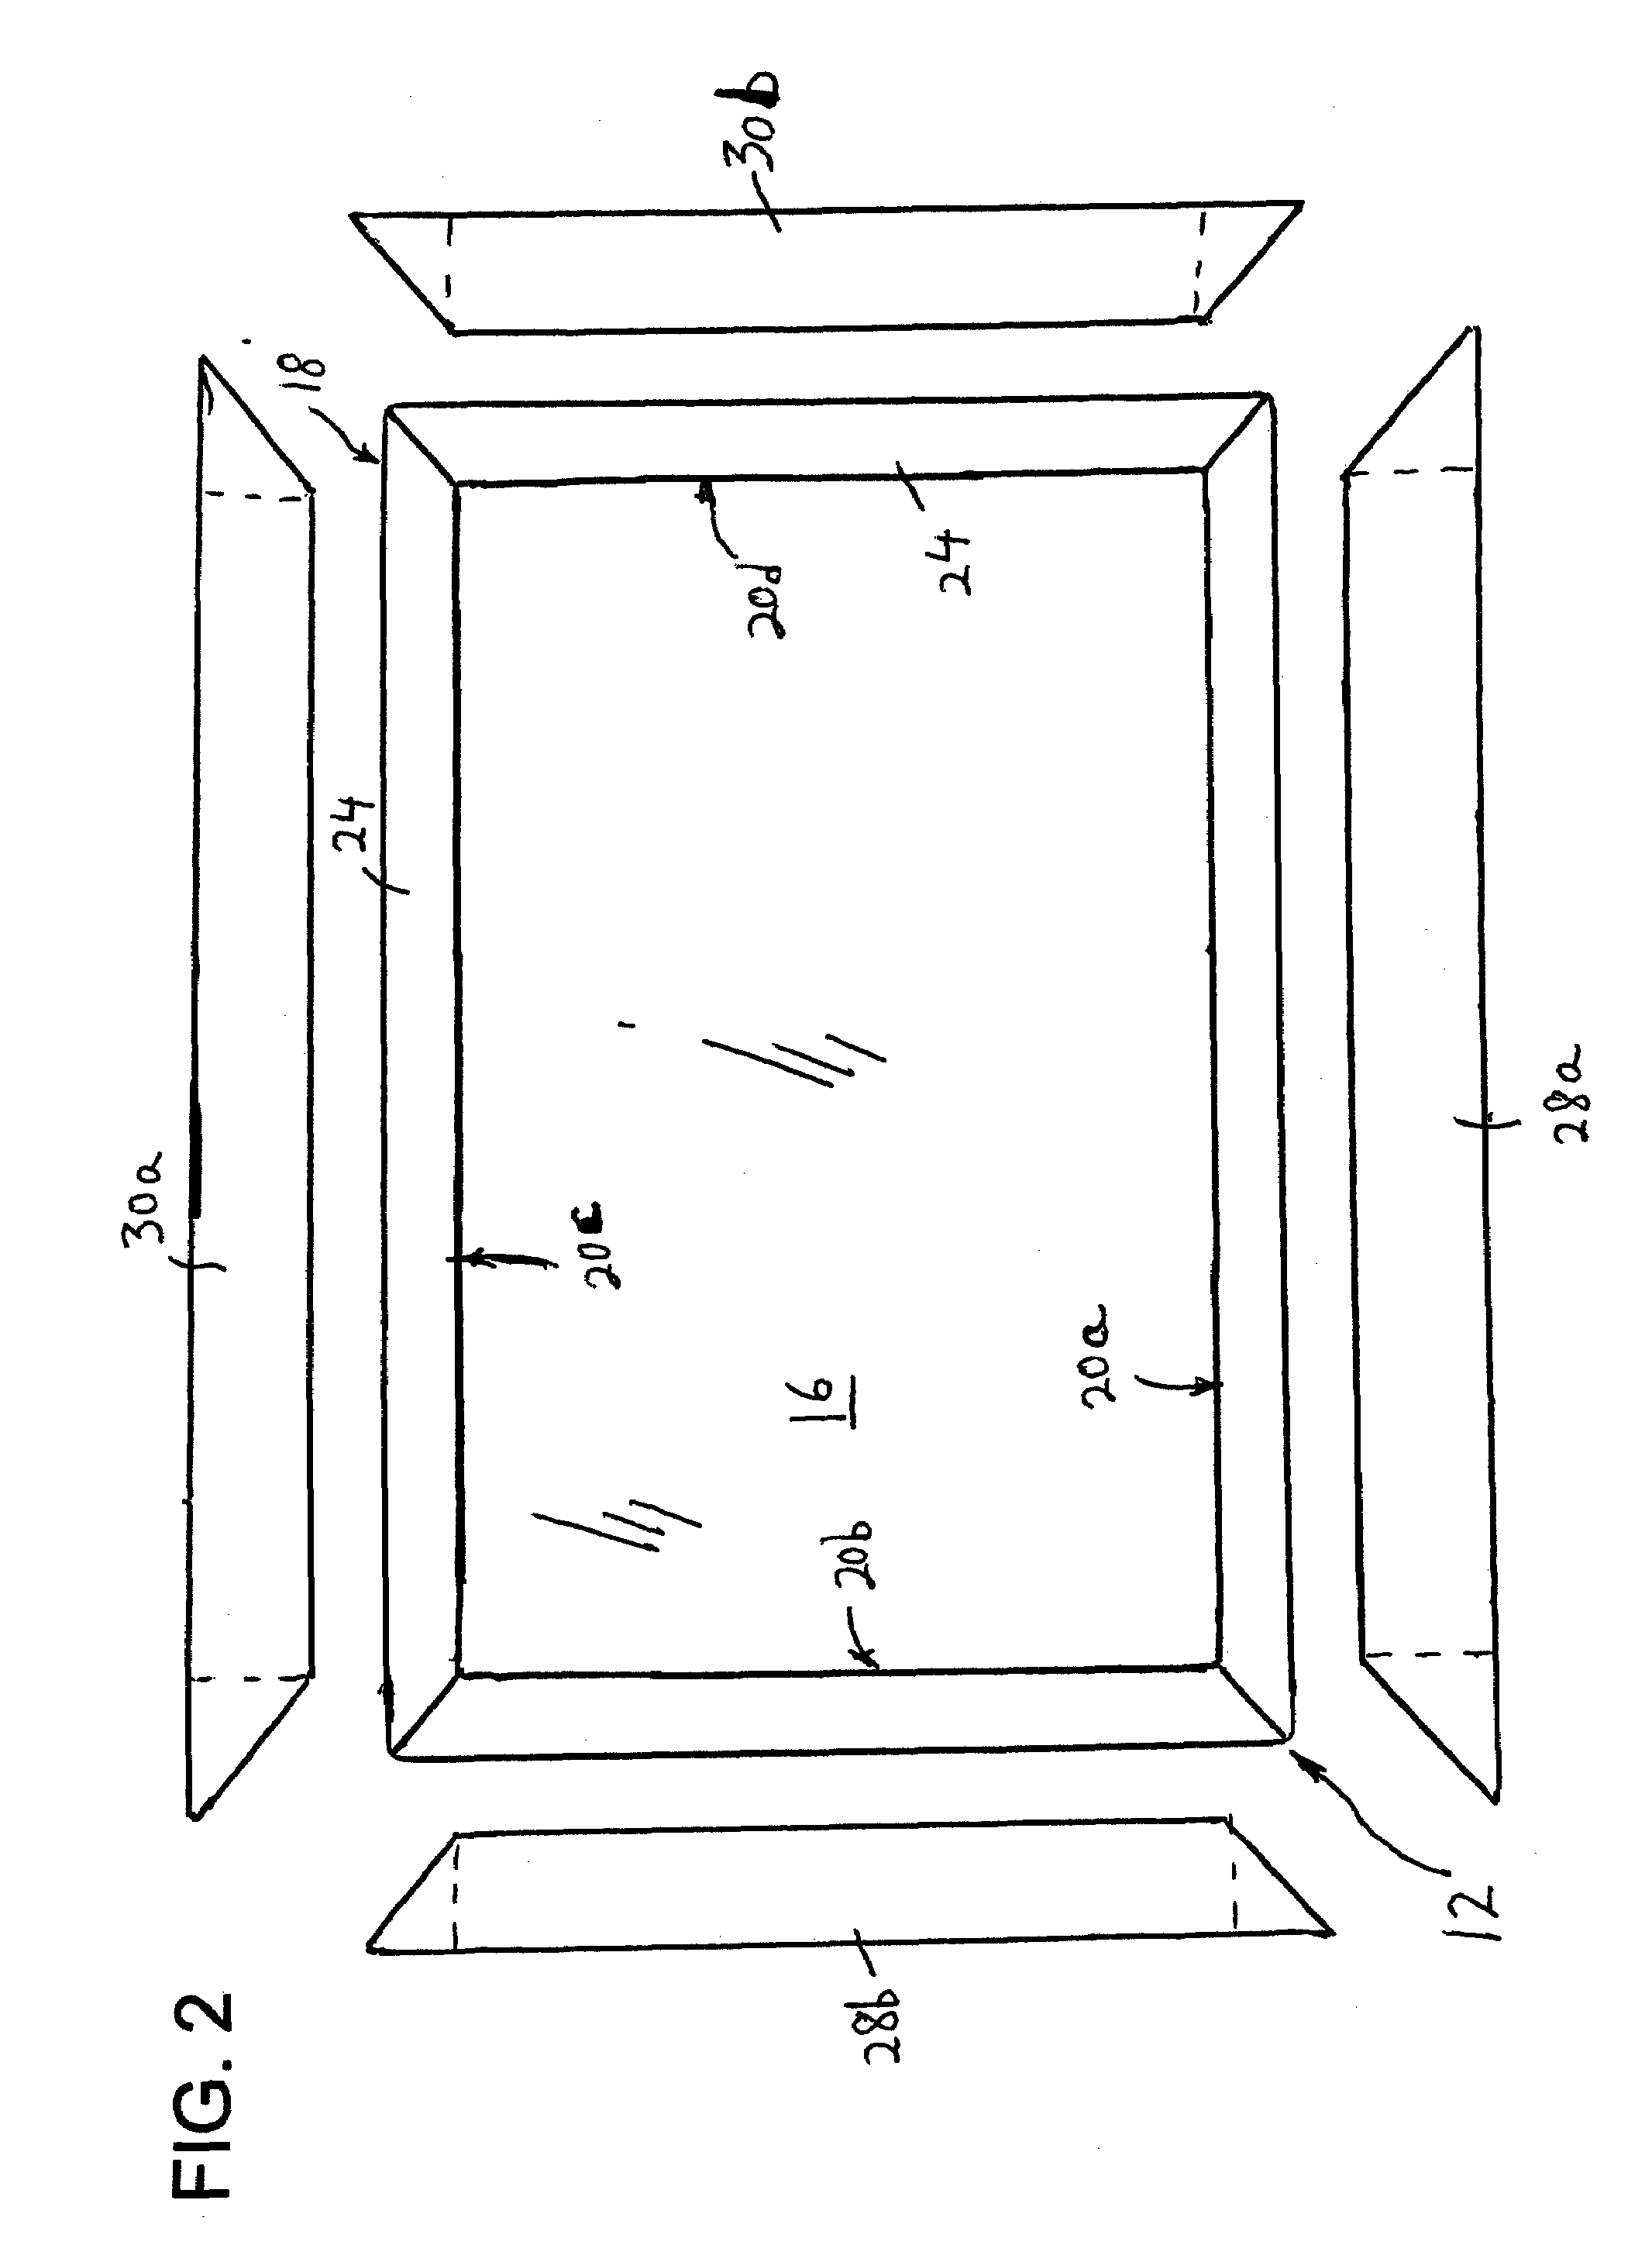 System for mounting wall panels to a wall structure